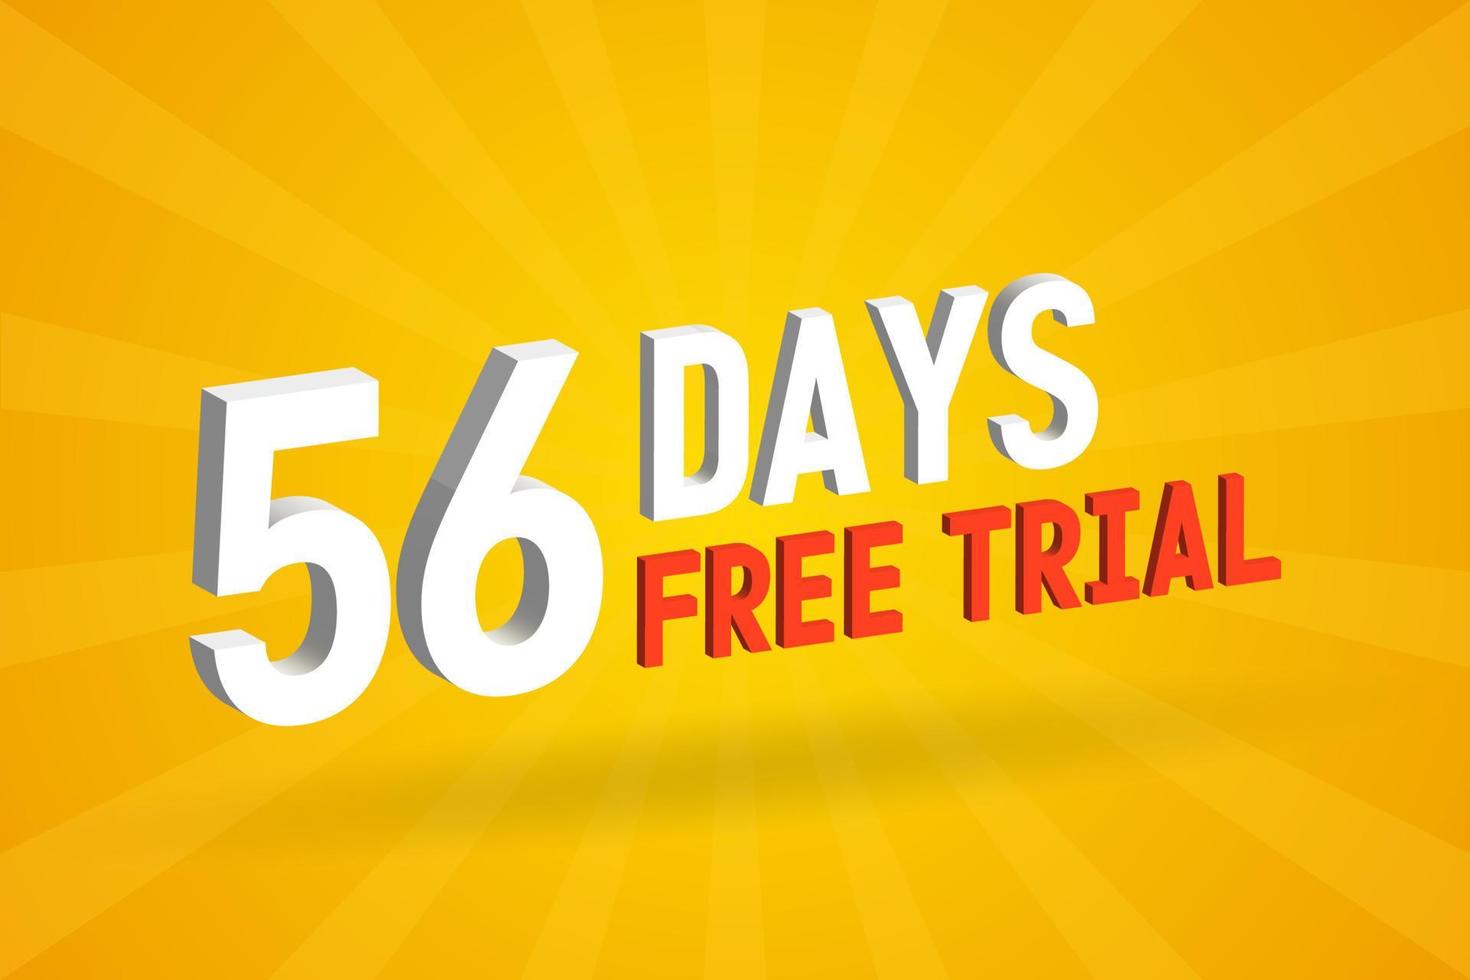 Free offer 56 Days free Trial 3D text stock vector